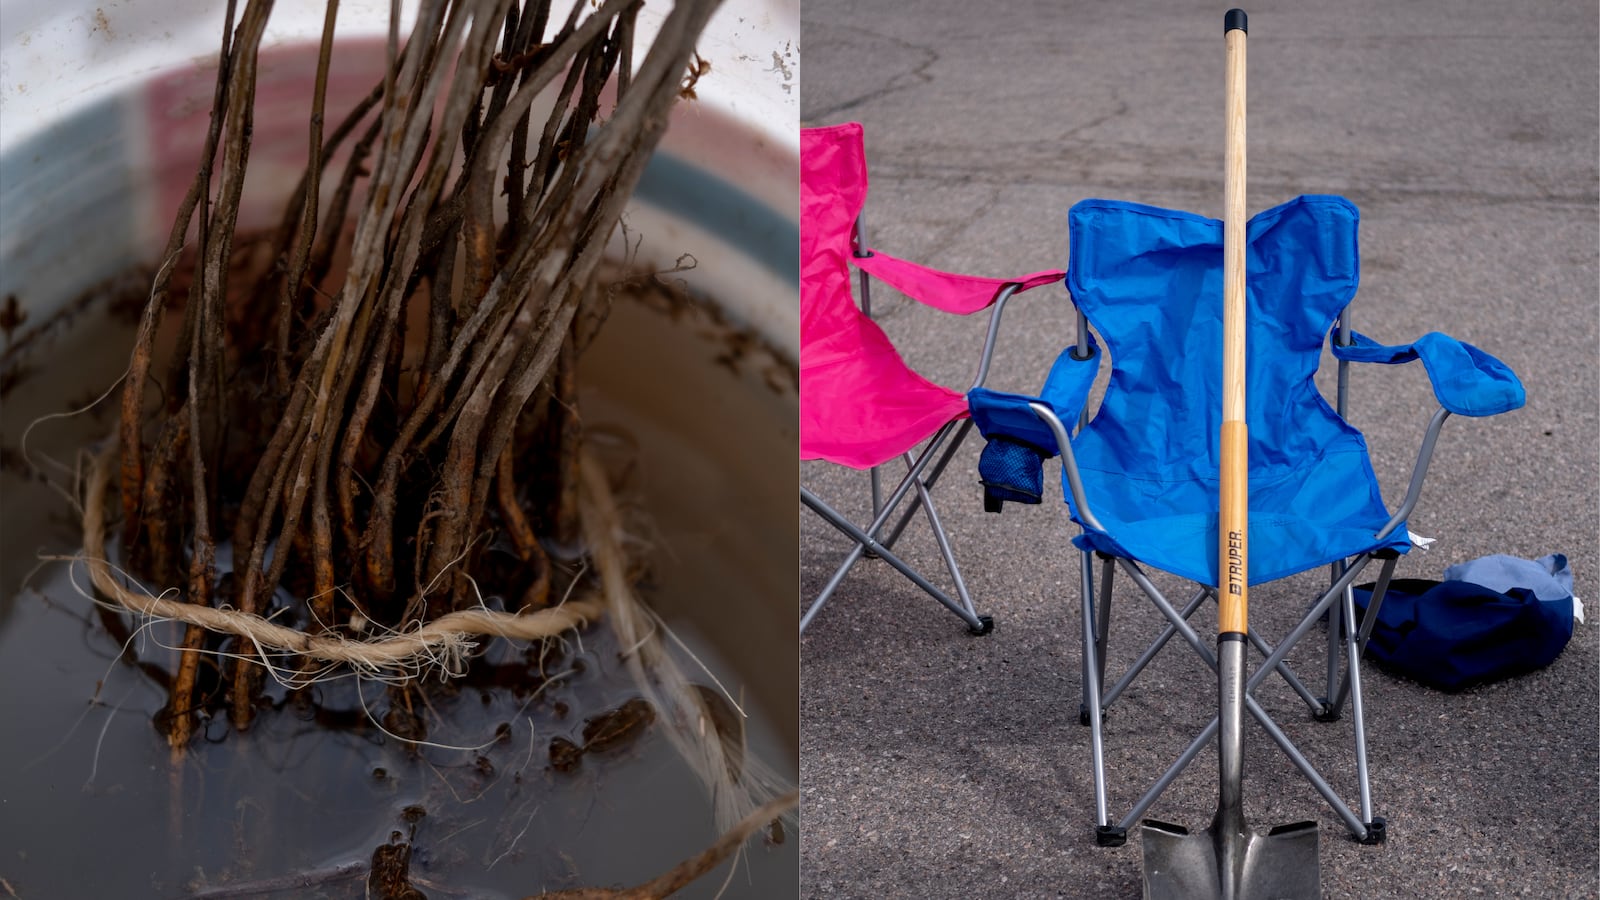 (Left) Tree saplings sit in a white bucket of water. (Right) A shovel leans against a blue lawn chair, which is sitting next to a pink chair.